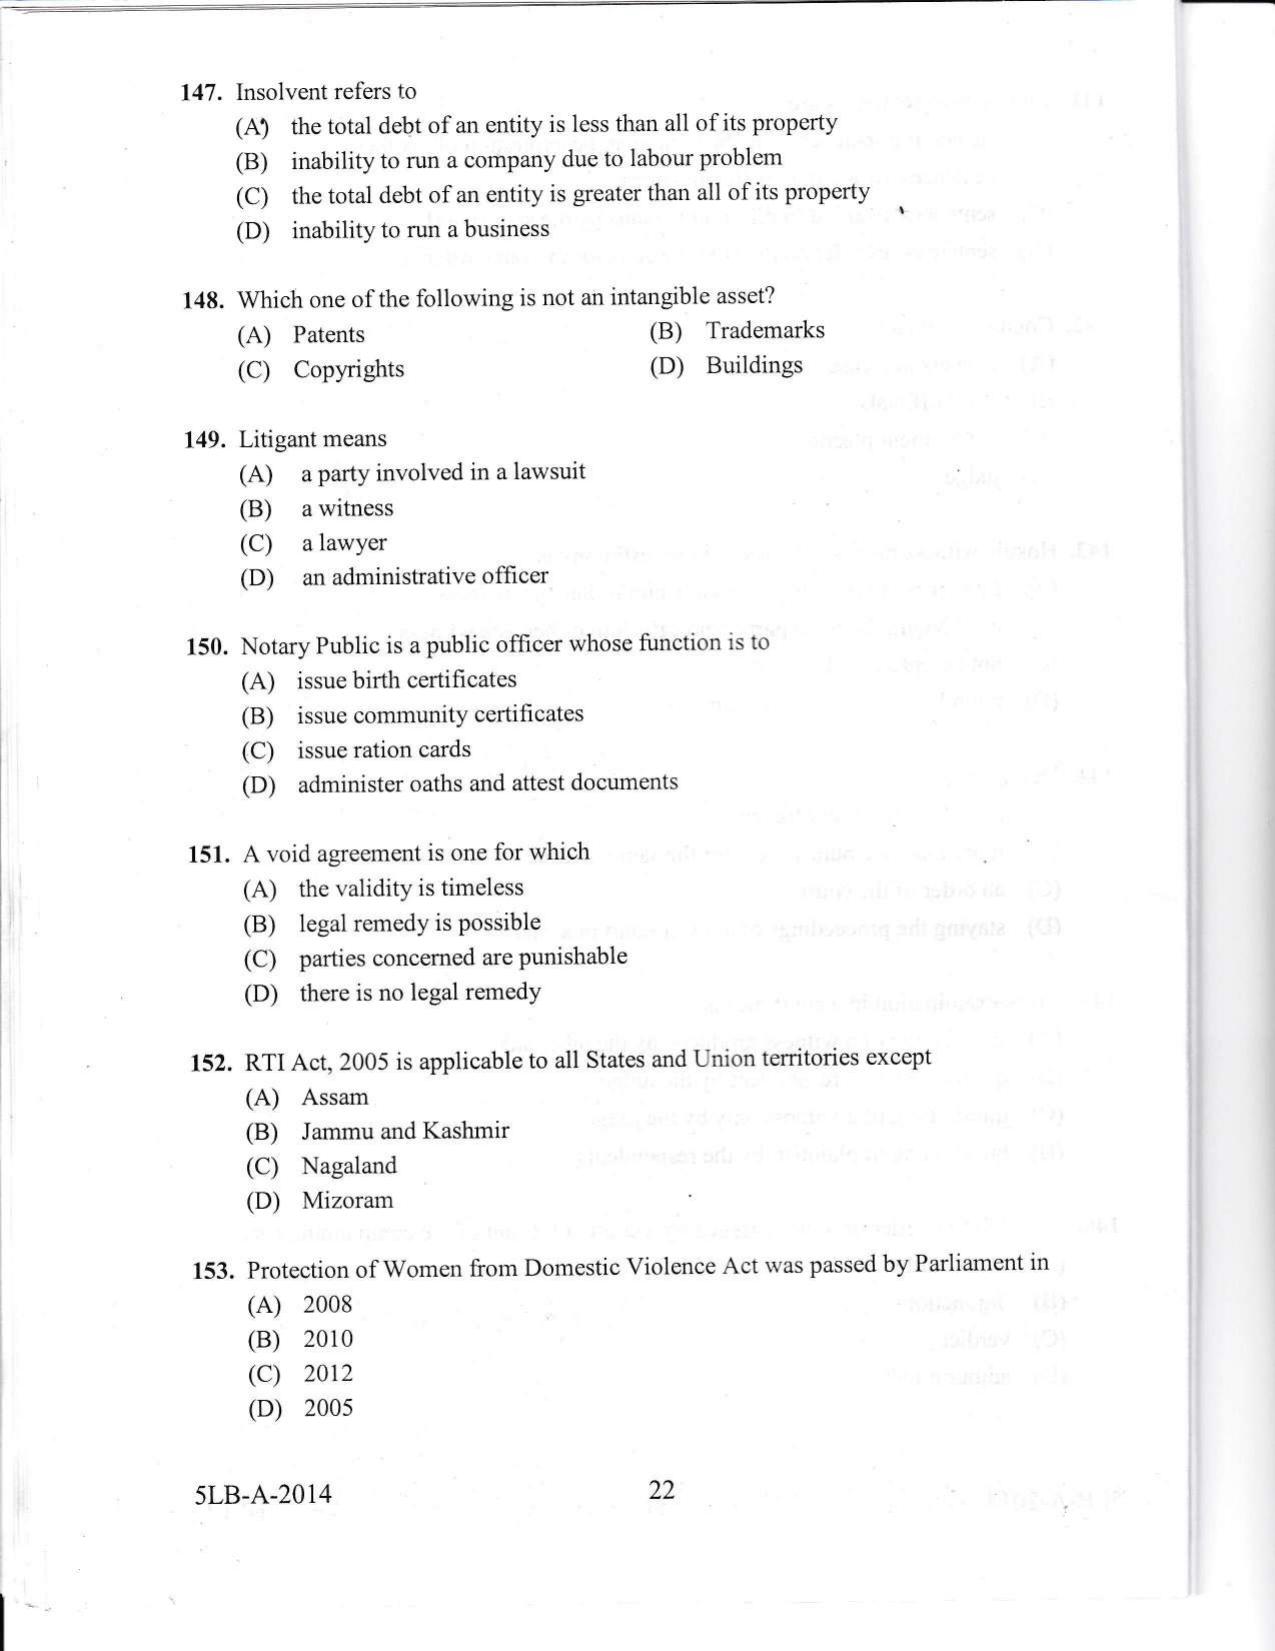 KLEE 5 Year LLB Exam 2014 Question Paper - Page 22